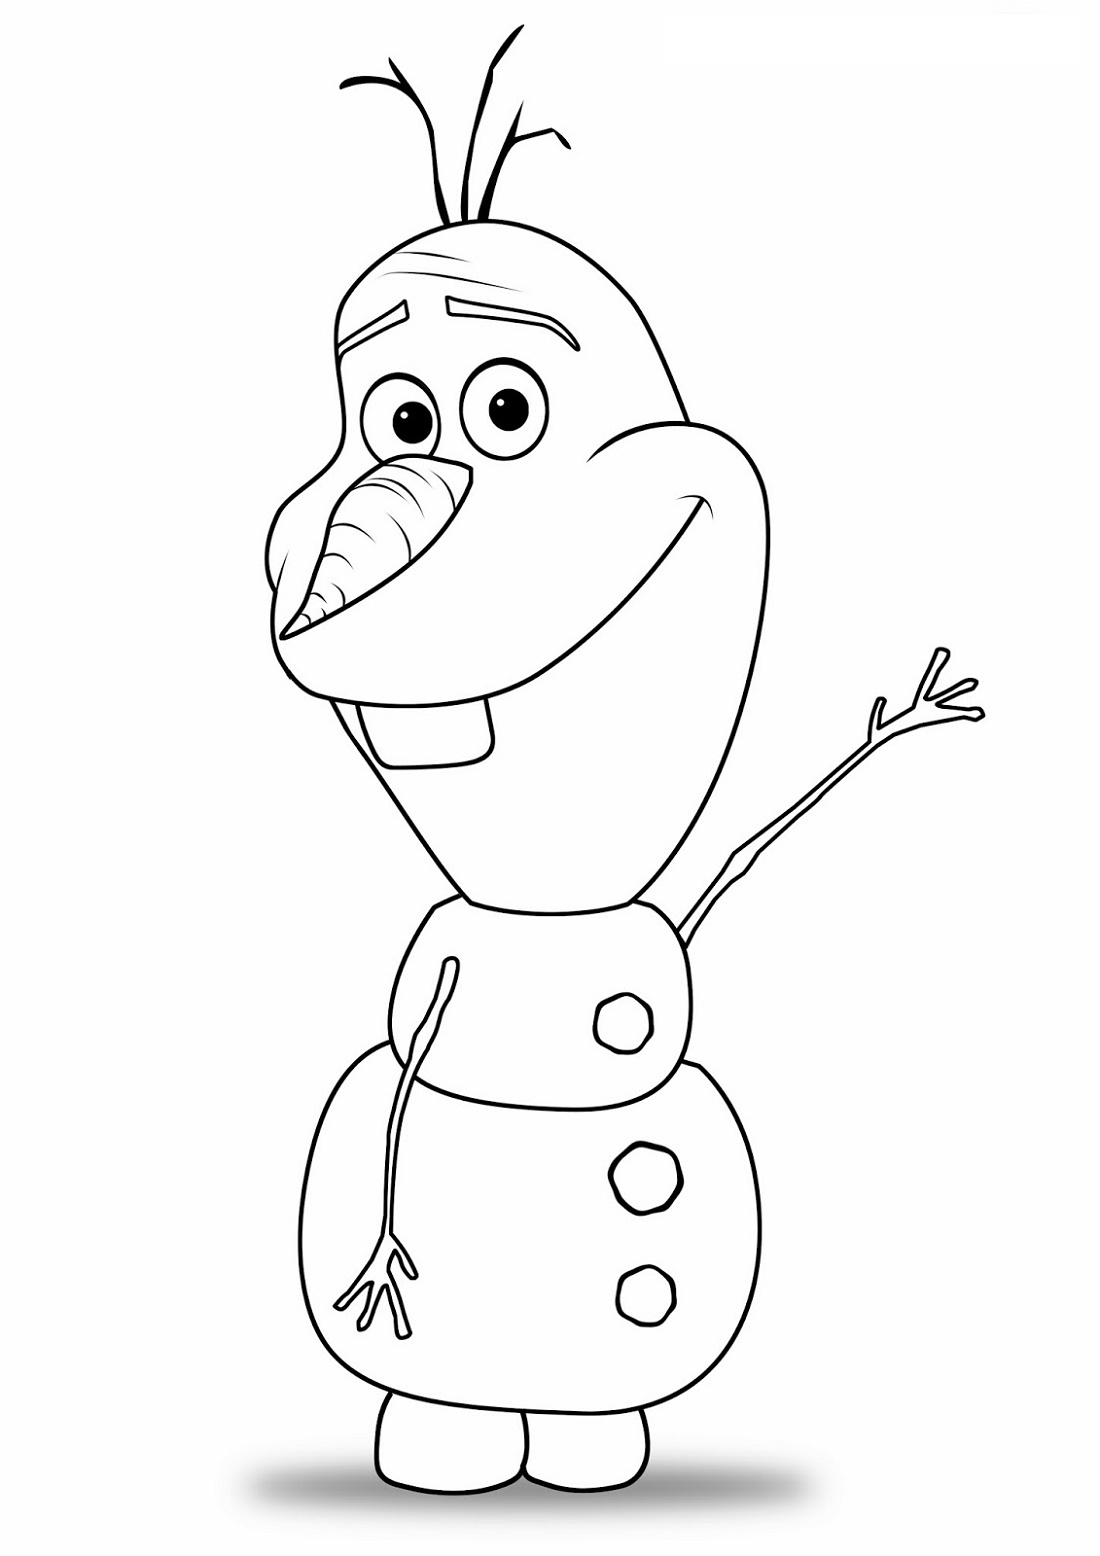 Olaf Coloring Pages The Snowman